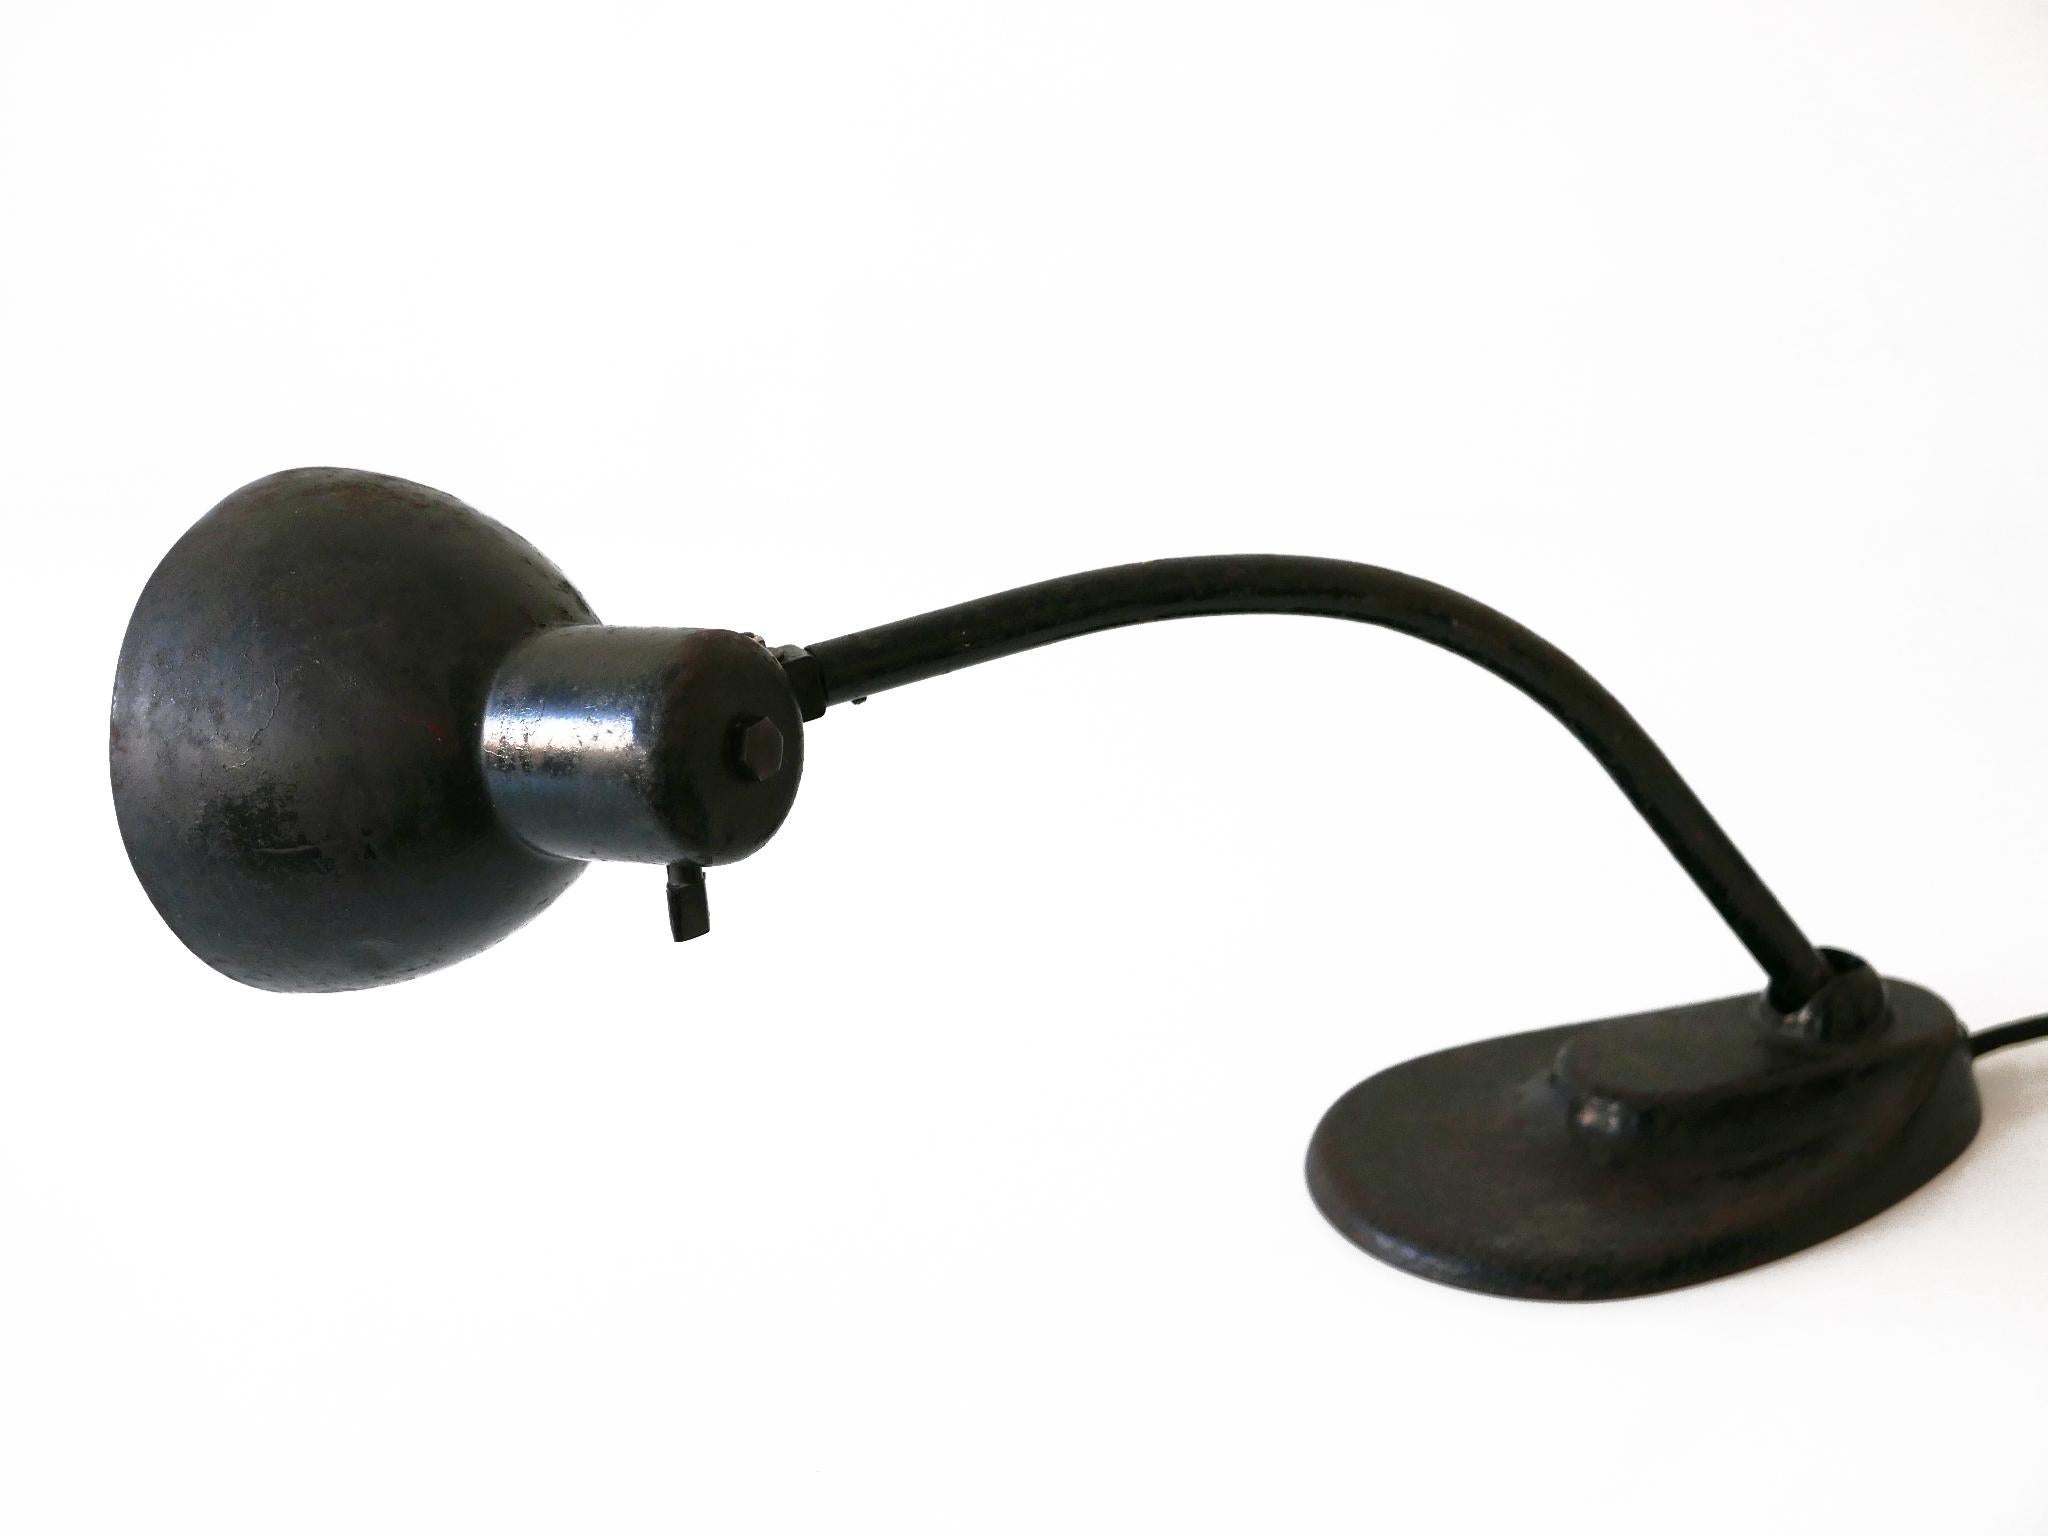 Bauhaus Table Lamp '967' by Marianne Brandt & Hin Bredendieck for Kandem, 1930s For Sale 8